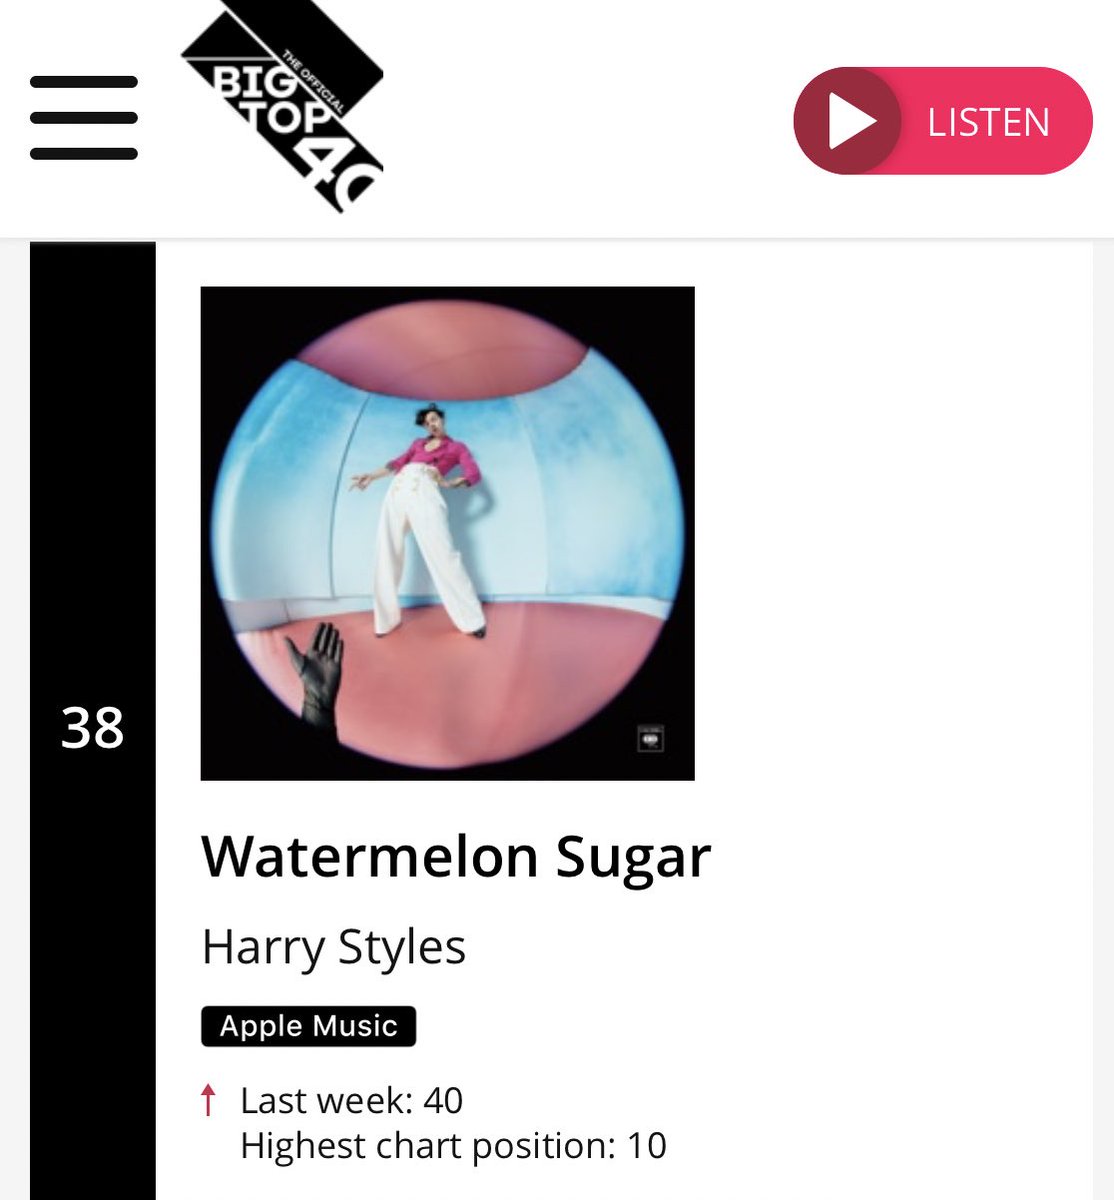 "Falling" is the highest entry on this week official top 40 UK. Harry has THREE songs on this chart: "Adore you", "Watermelon Sugar" and "Falling".